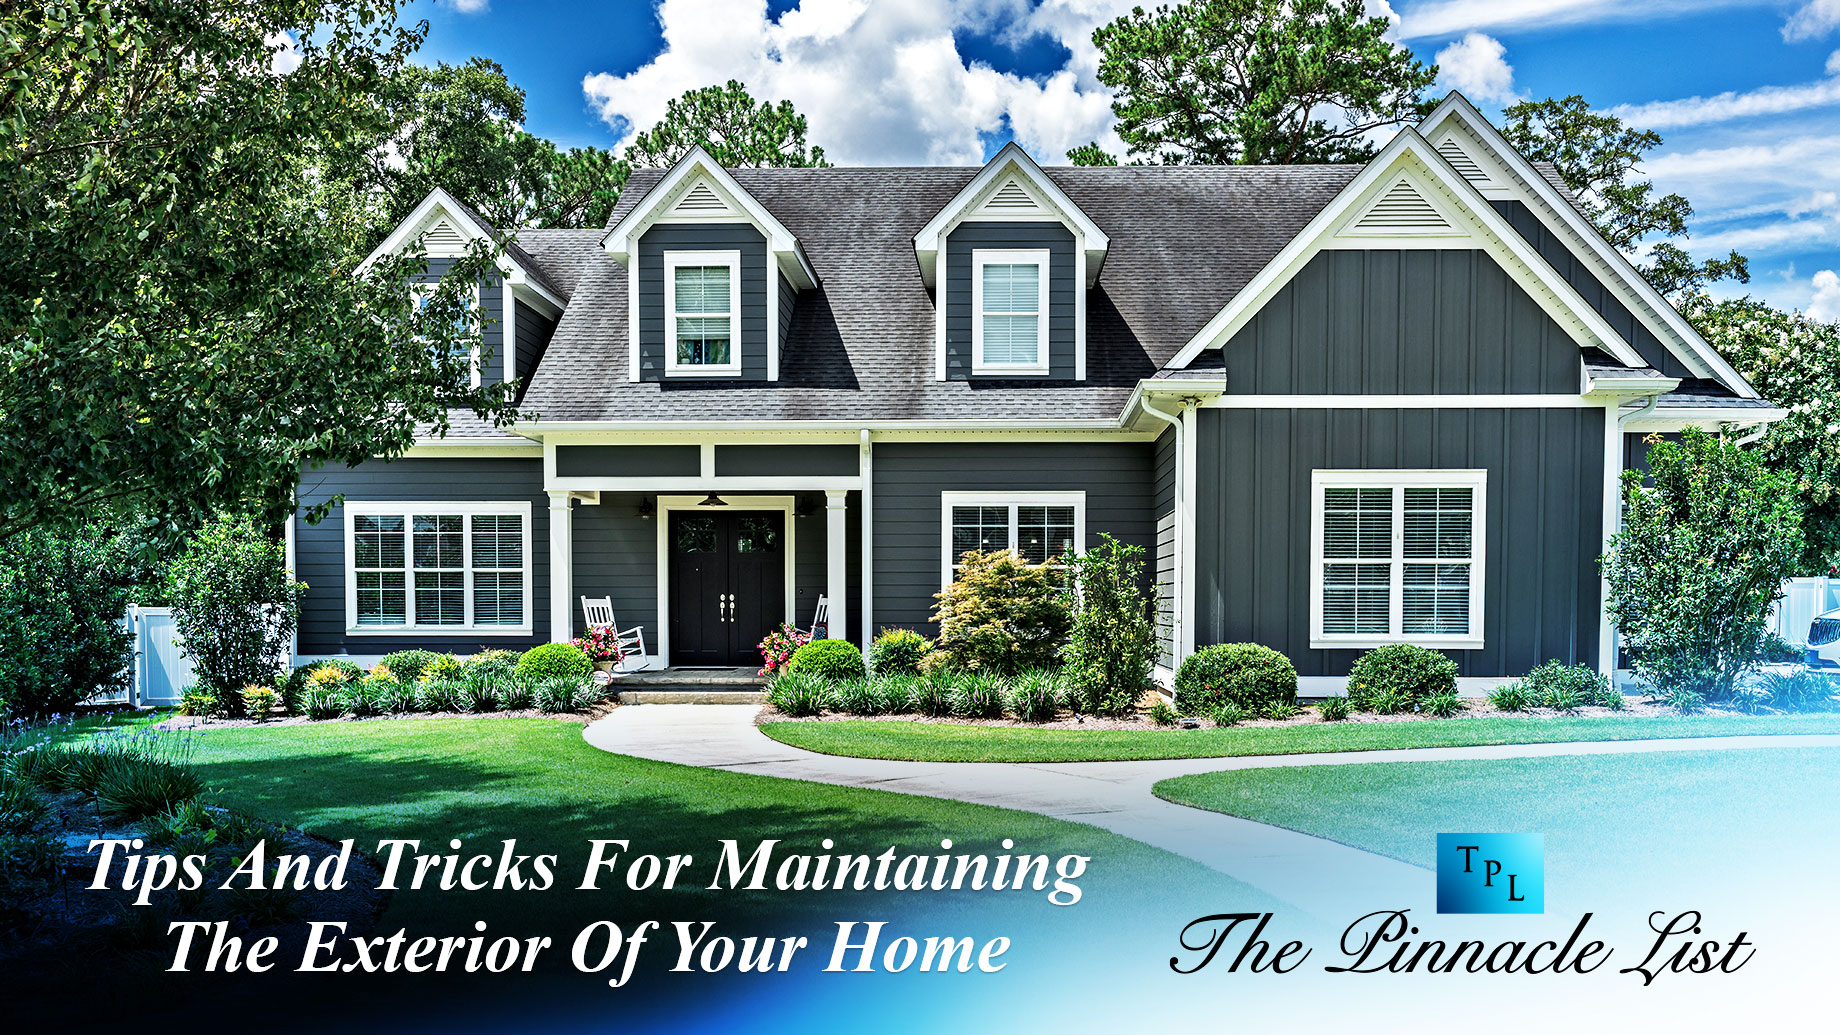 Tips And Tricks For A Well-Maintained Exterior Of Your Home